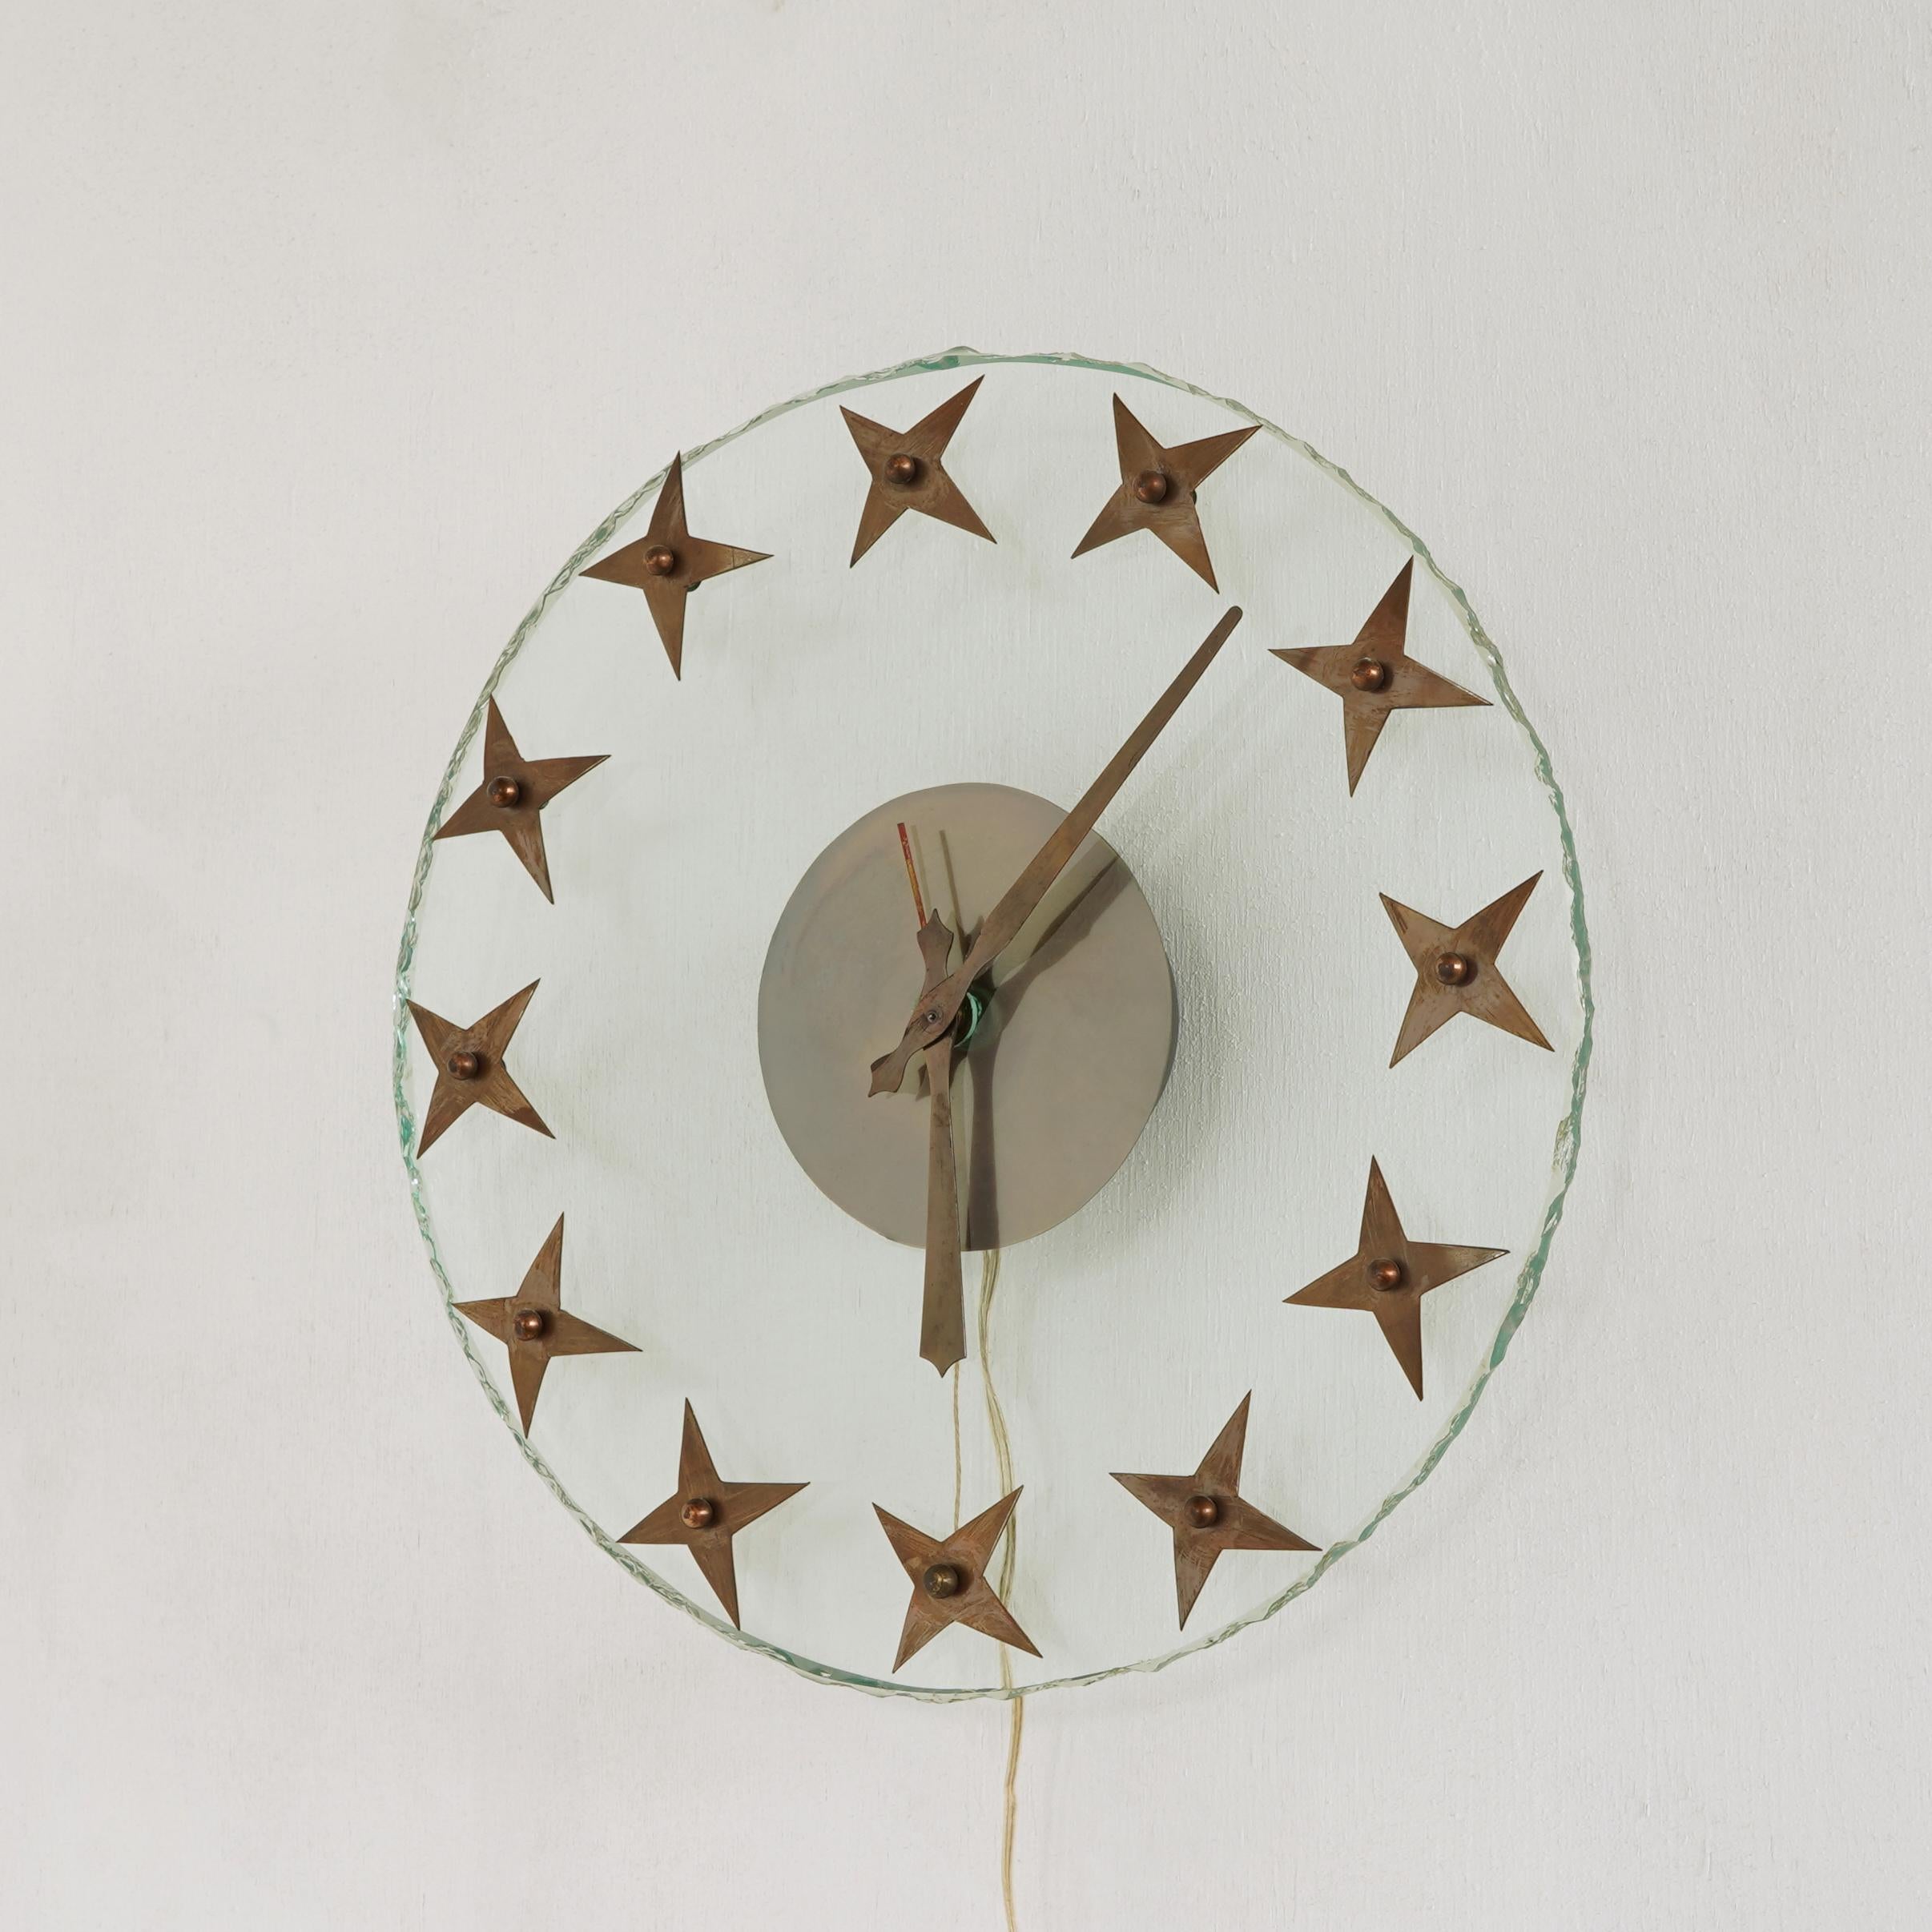 Beautifully detailed electric wall clock in glass and brass. Probably made in the 1940’s.

This thick and large glass wall clock is refined yet robust and the green glass has beautiful rough carved edges. The hours are represented by handmade brass